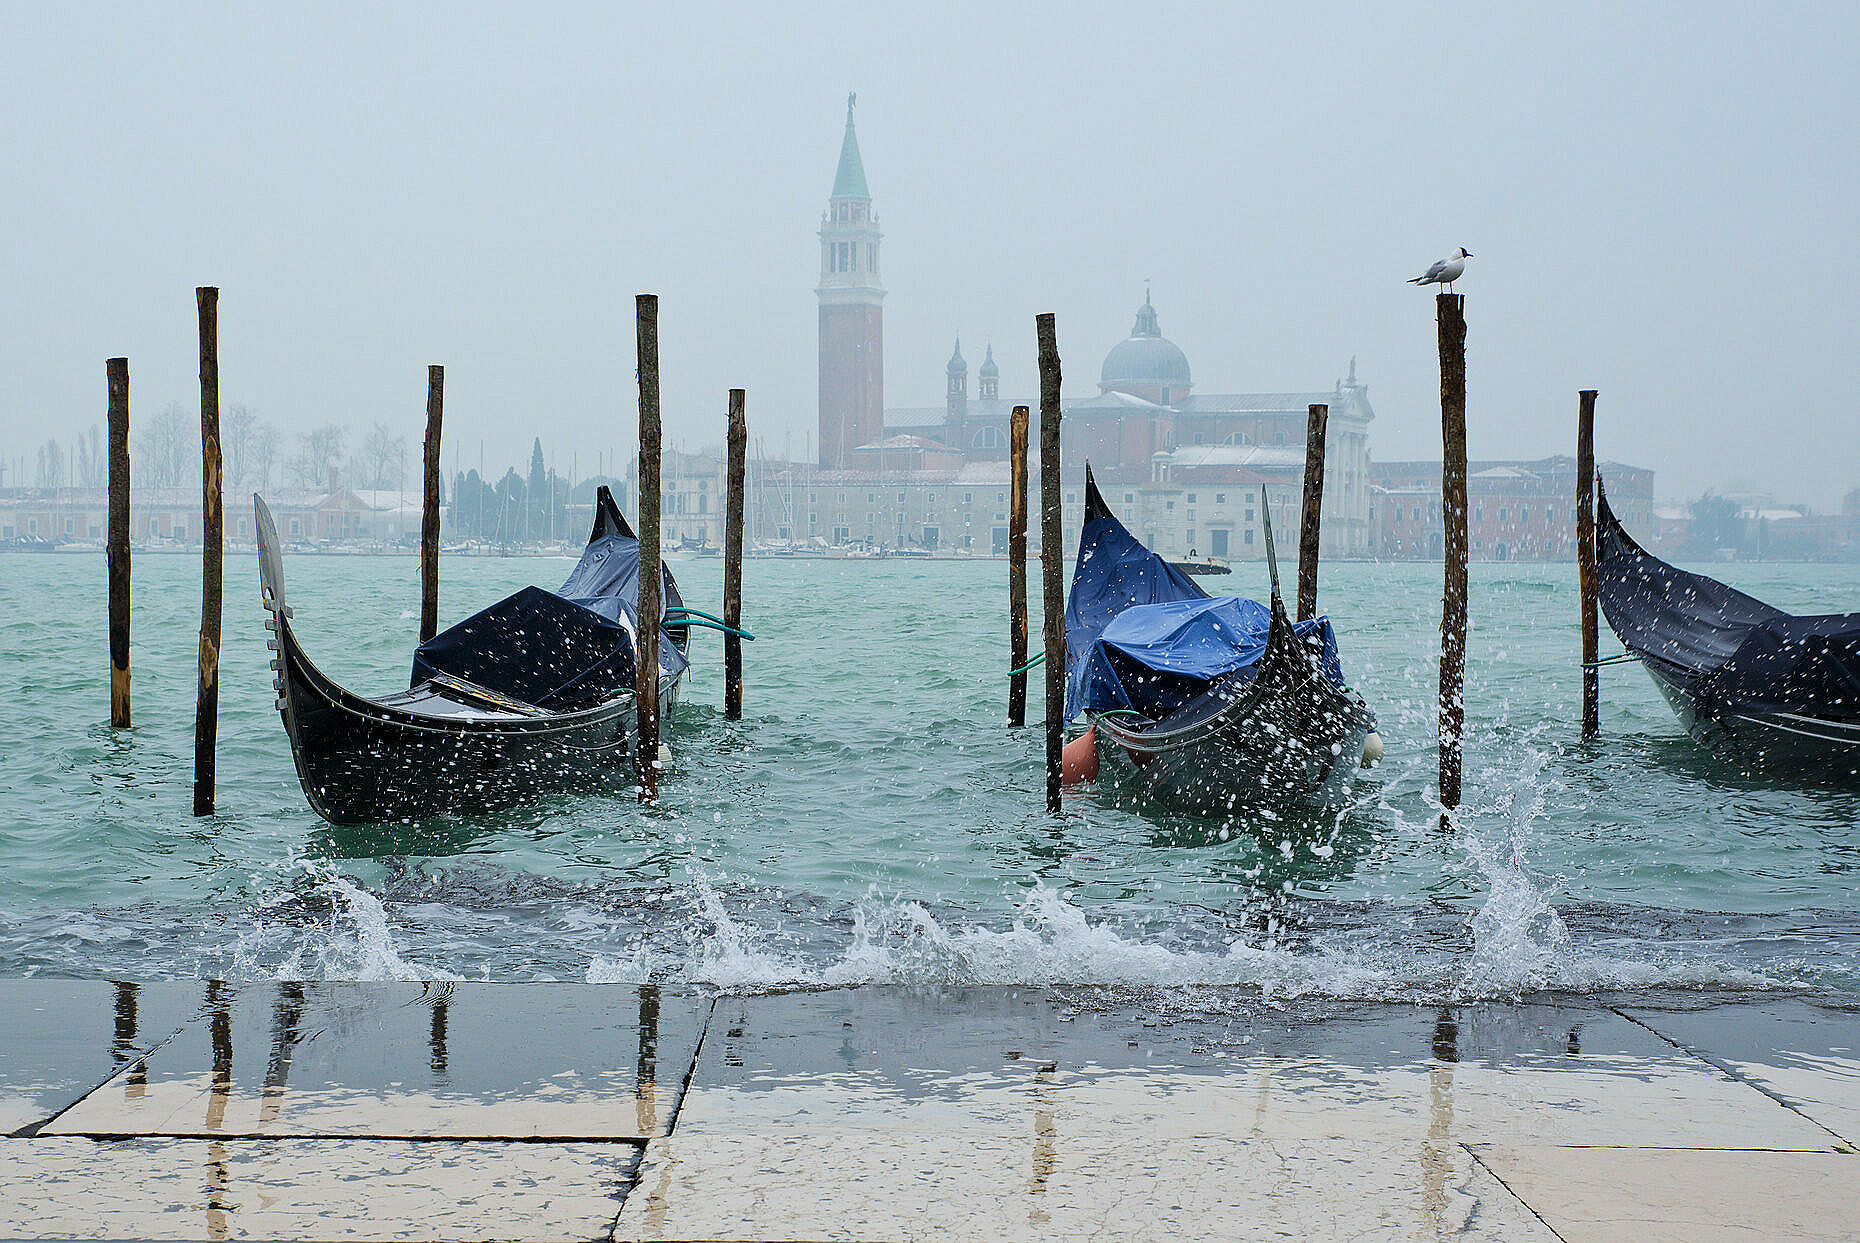 Three gondolas bouncing in the waves at St. Mark's square on a winter day.